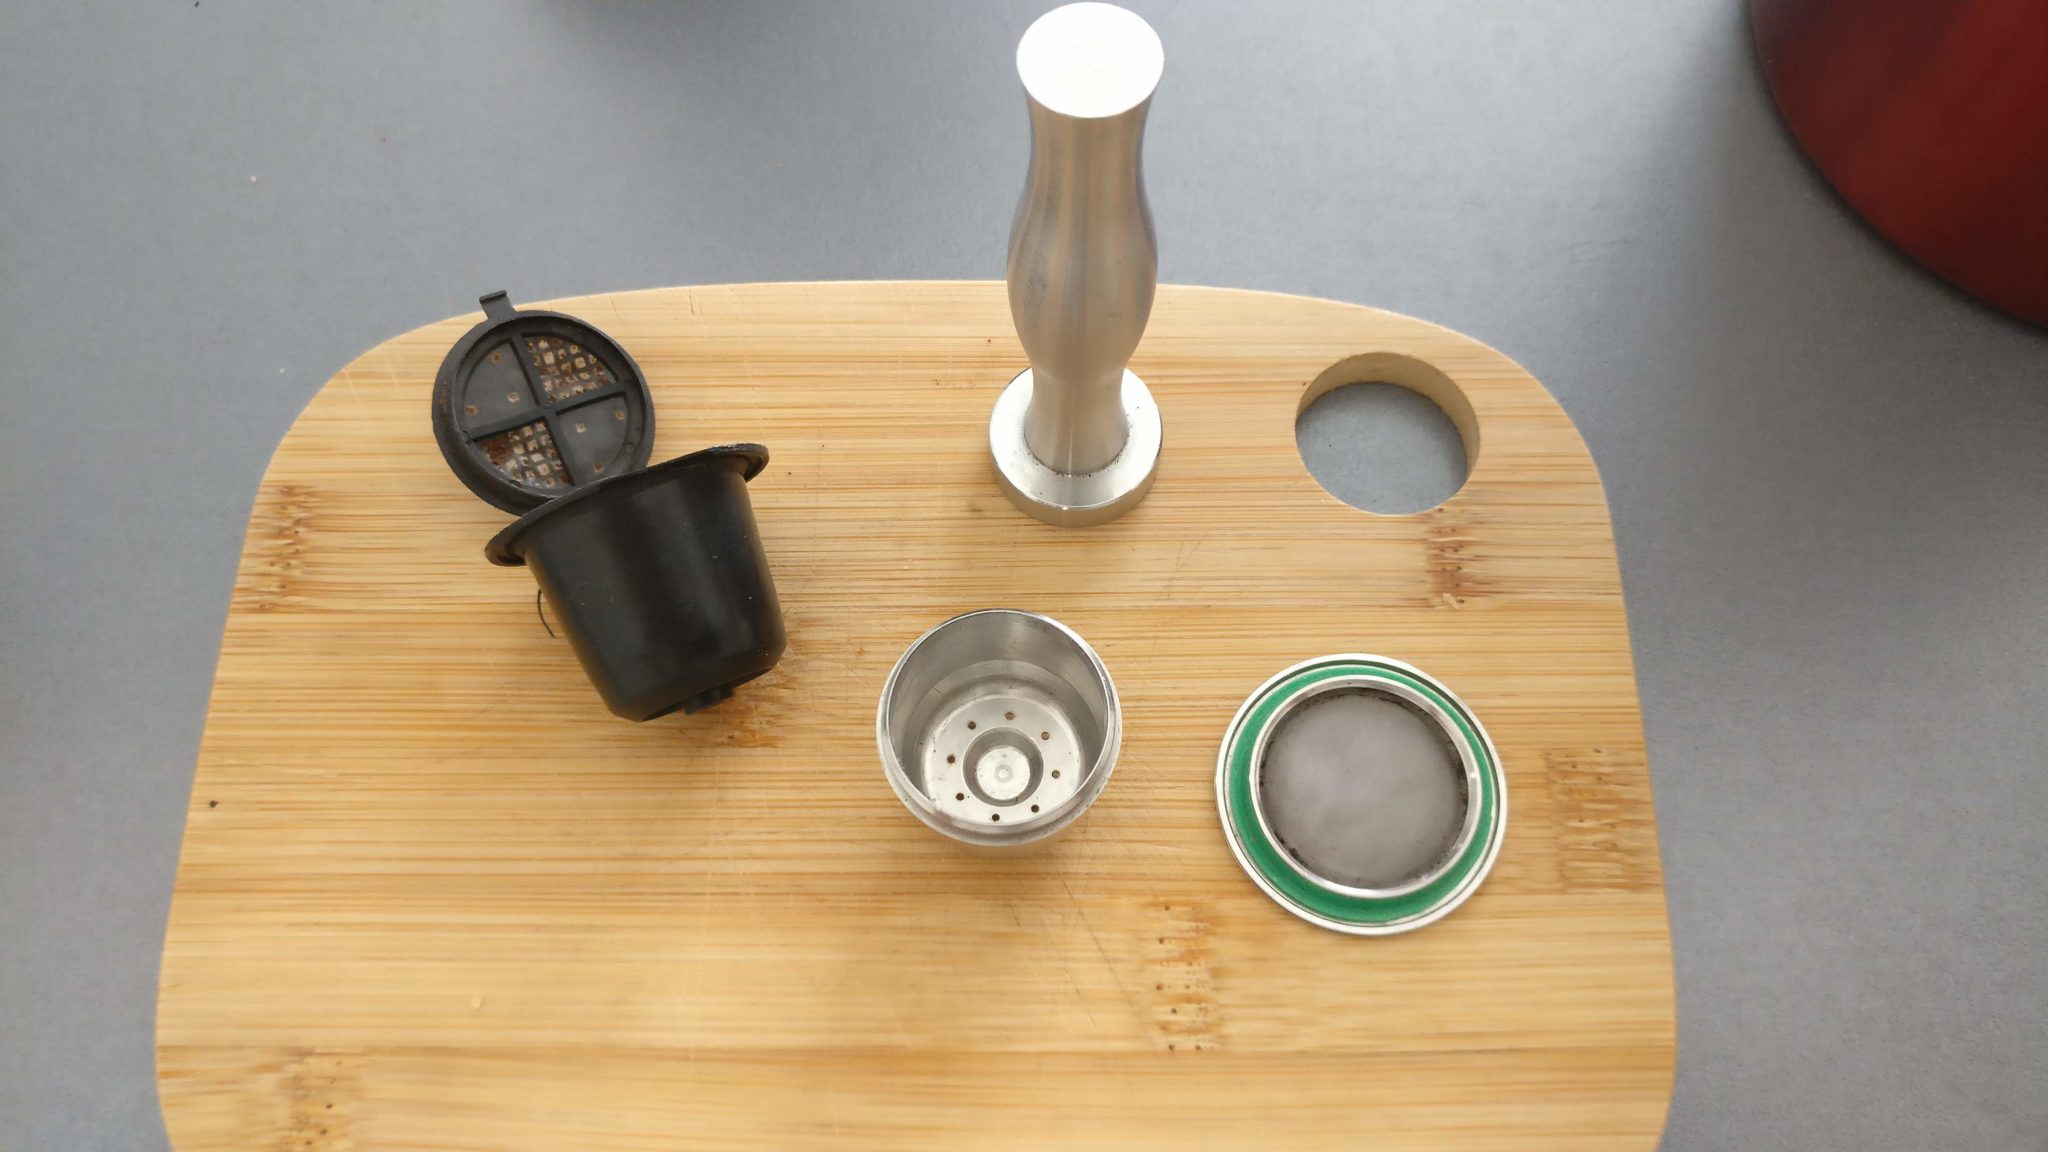 HOW TO MAKE YOUR OWN REUSABLE NESPRESSO PODS